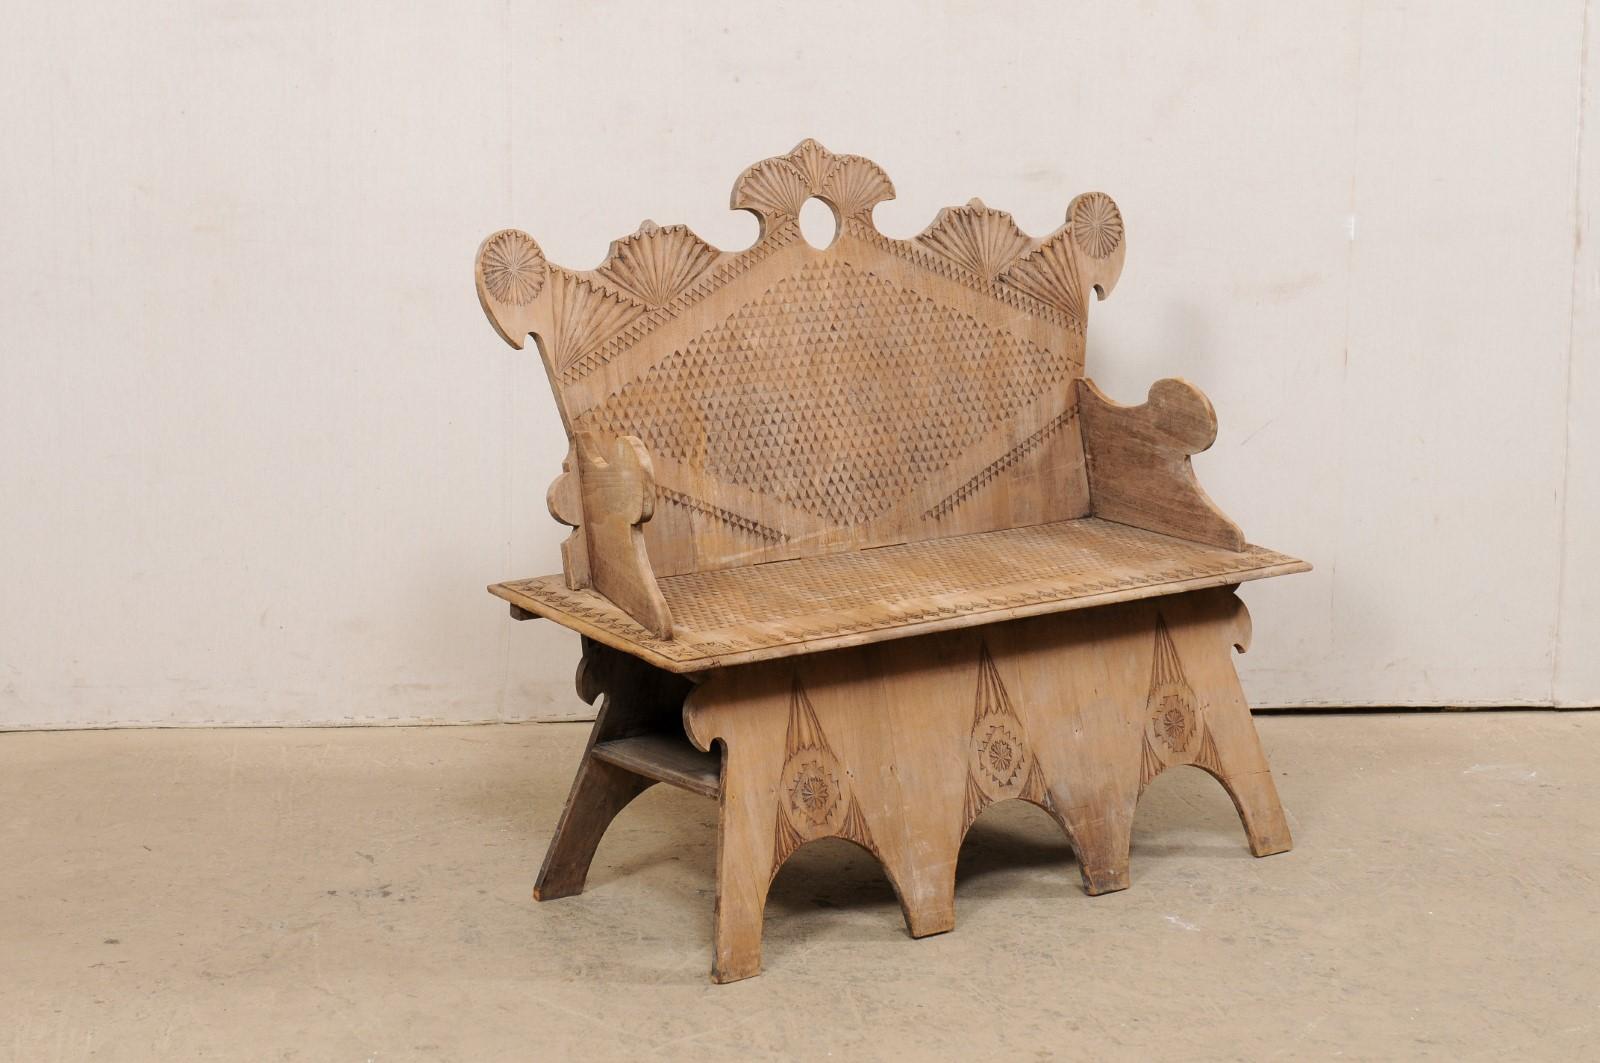 A Spanish carved wooden arm-bench with back from the mid 20th century. This vintage natural wood bench from Spain is adorn with Moorish influenced carvings, featuring a high back with undulating crest in a fan-carved motif with pierced center. The